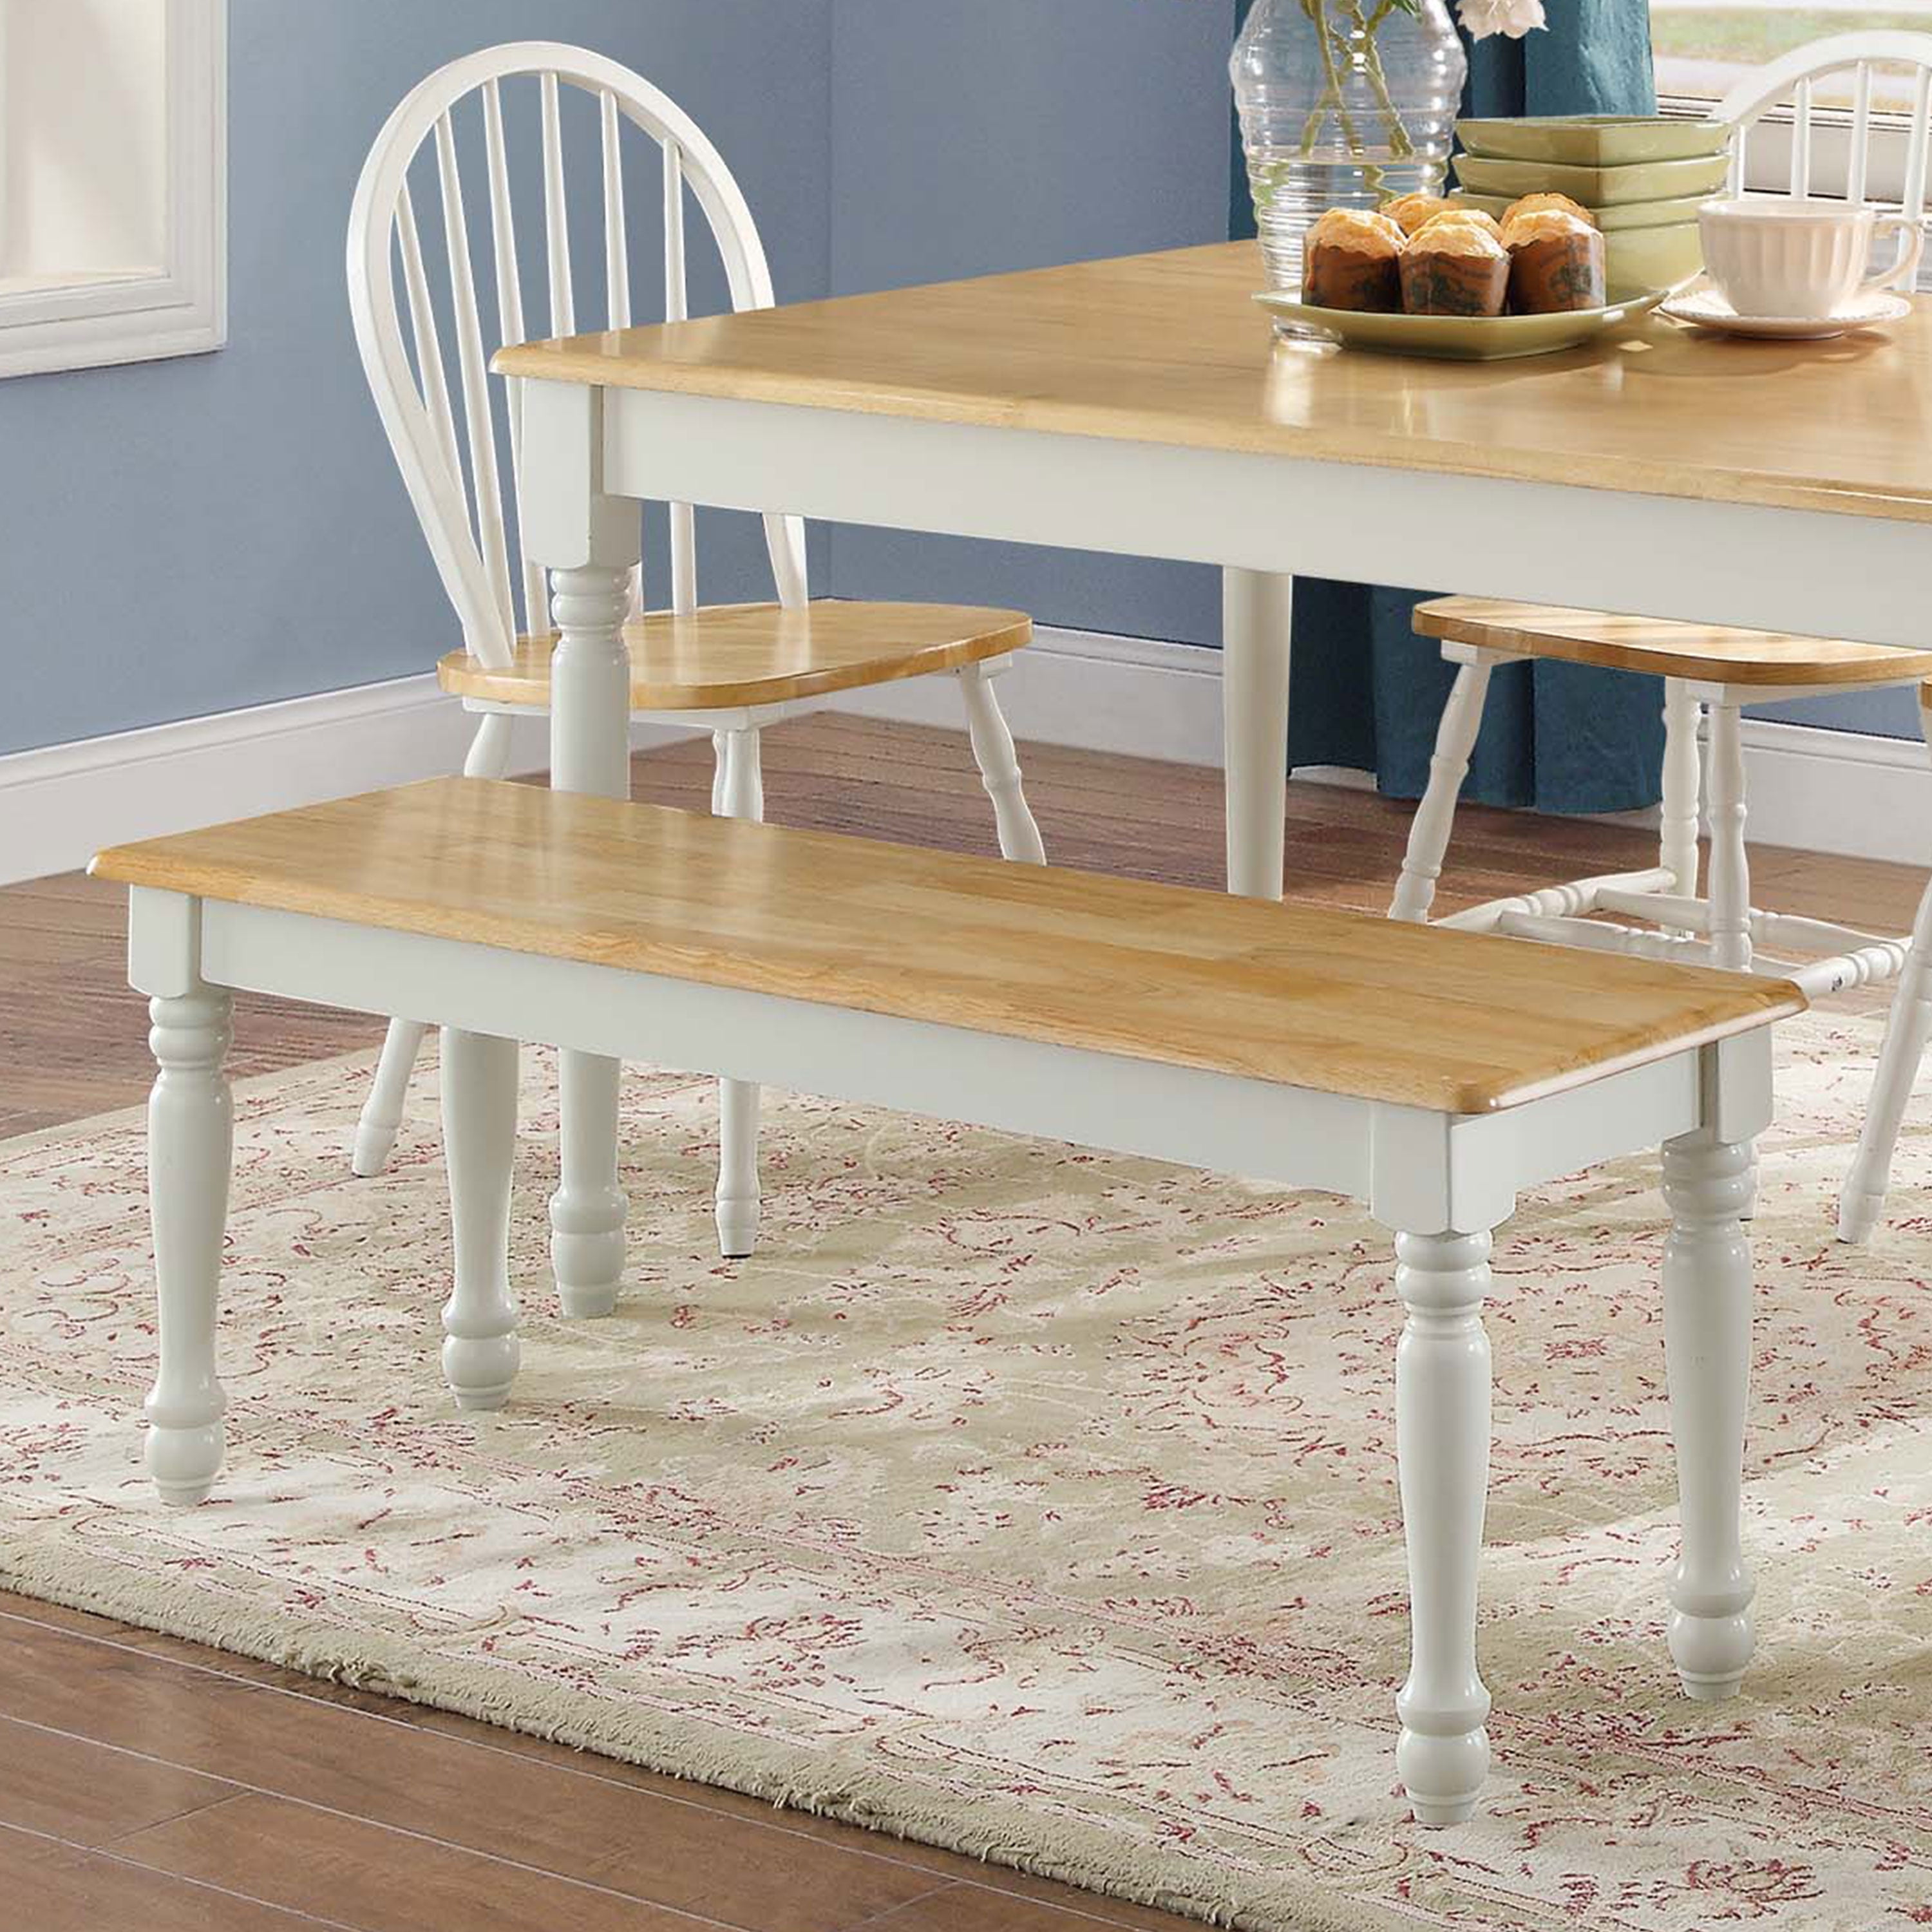 Better Homes Gardens Autumn Lane Farmhouse Solid Wood Dining Bench White And Natural Finish Walmart Com Walmart Com